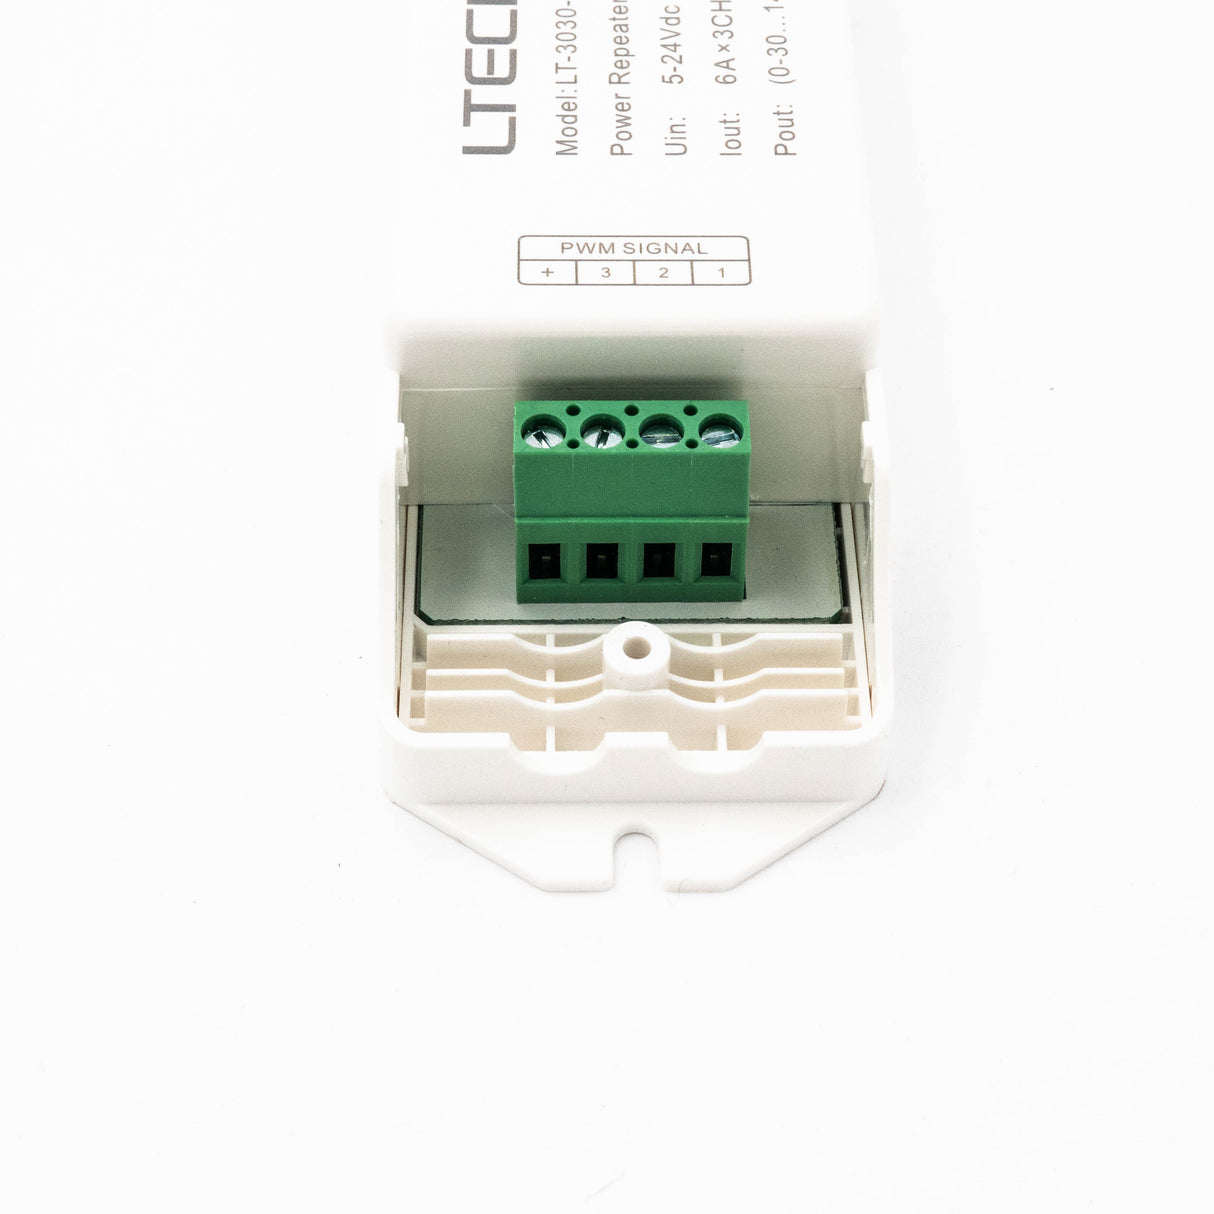 Ltech LT-3030-6A PWM Constant Voltage Repeater - RGB - PHOTO 5